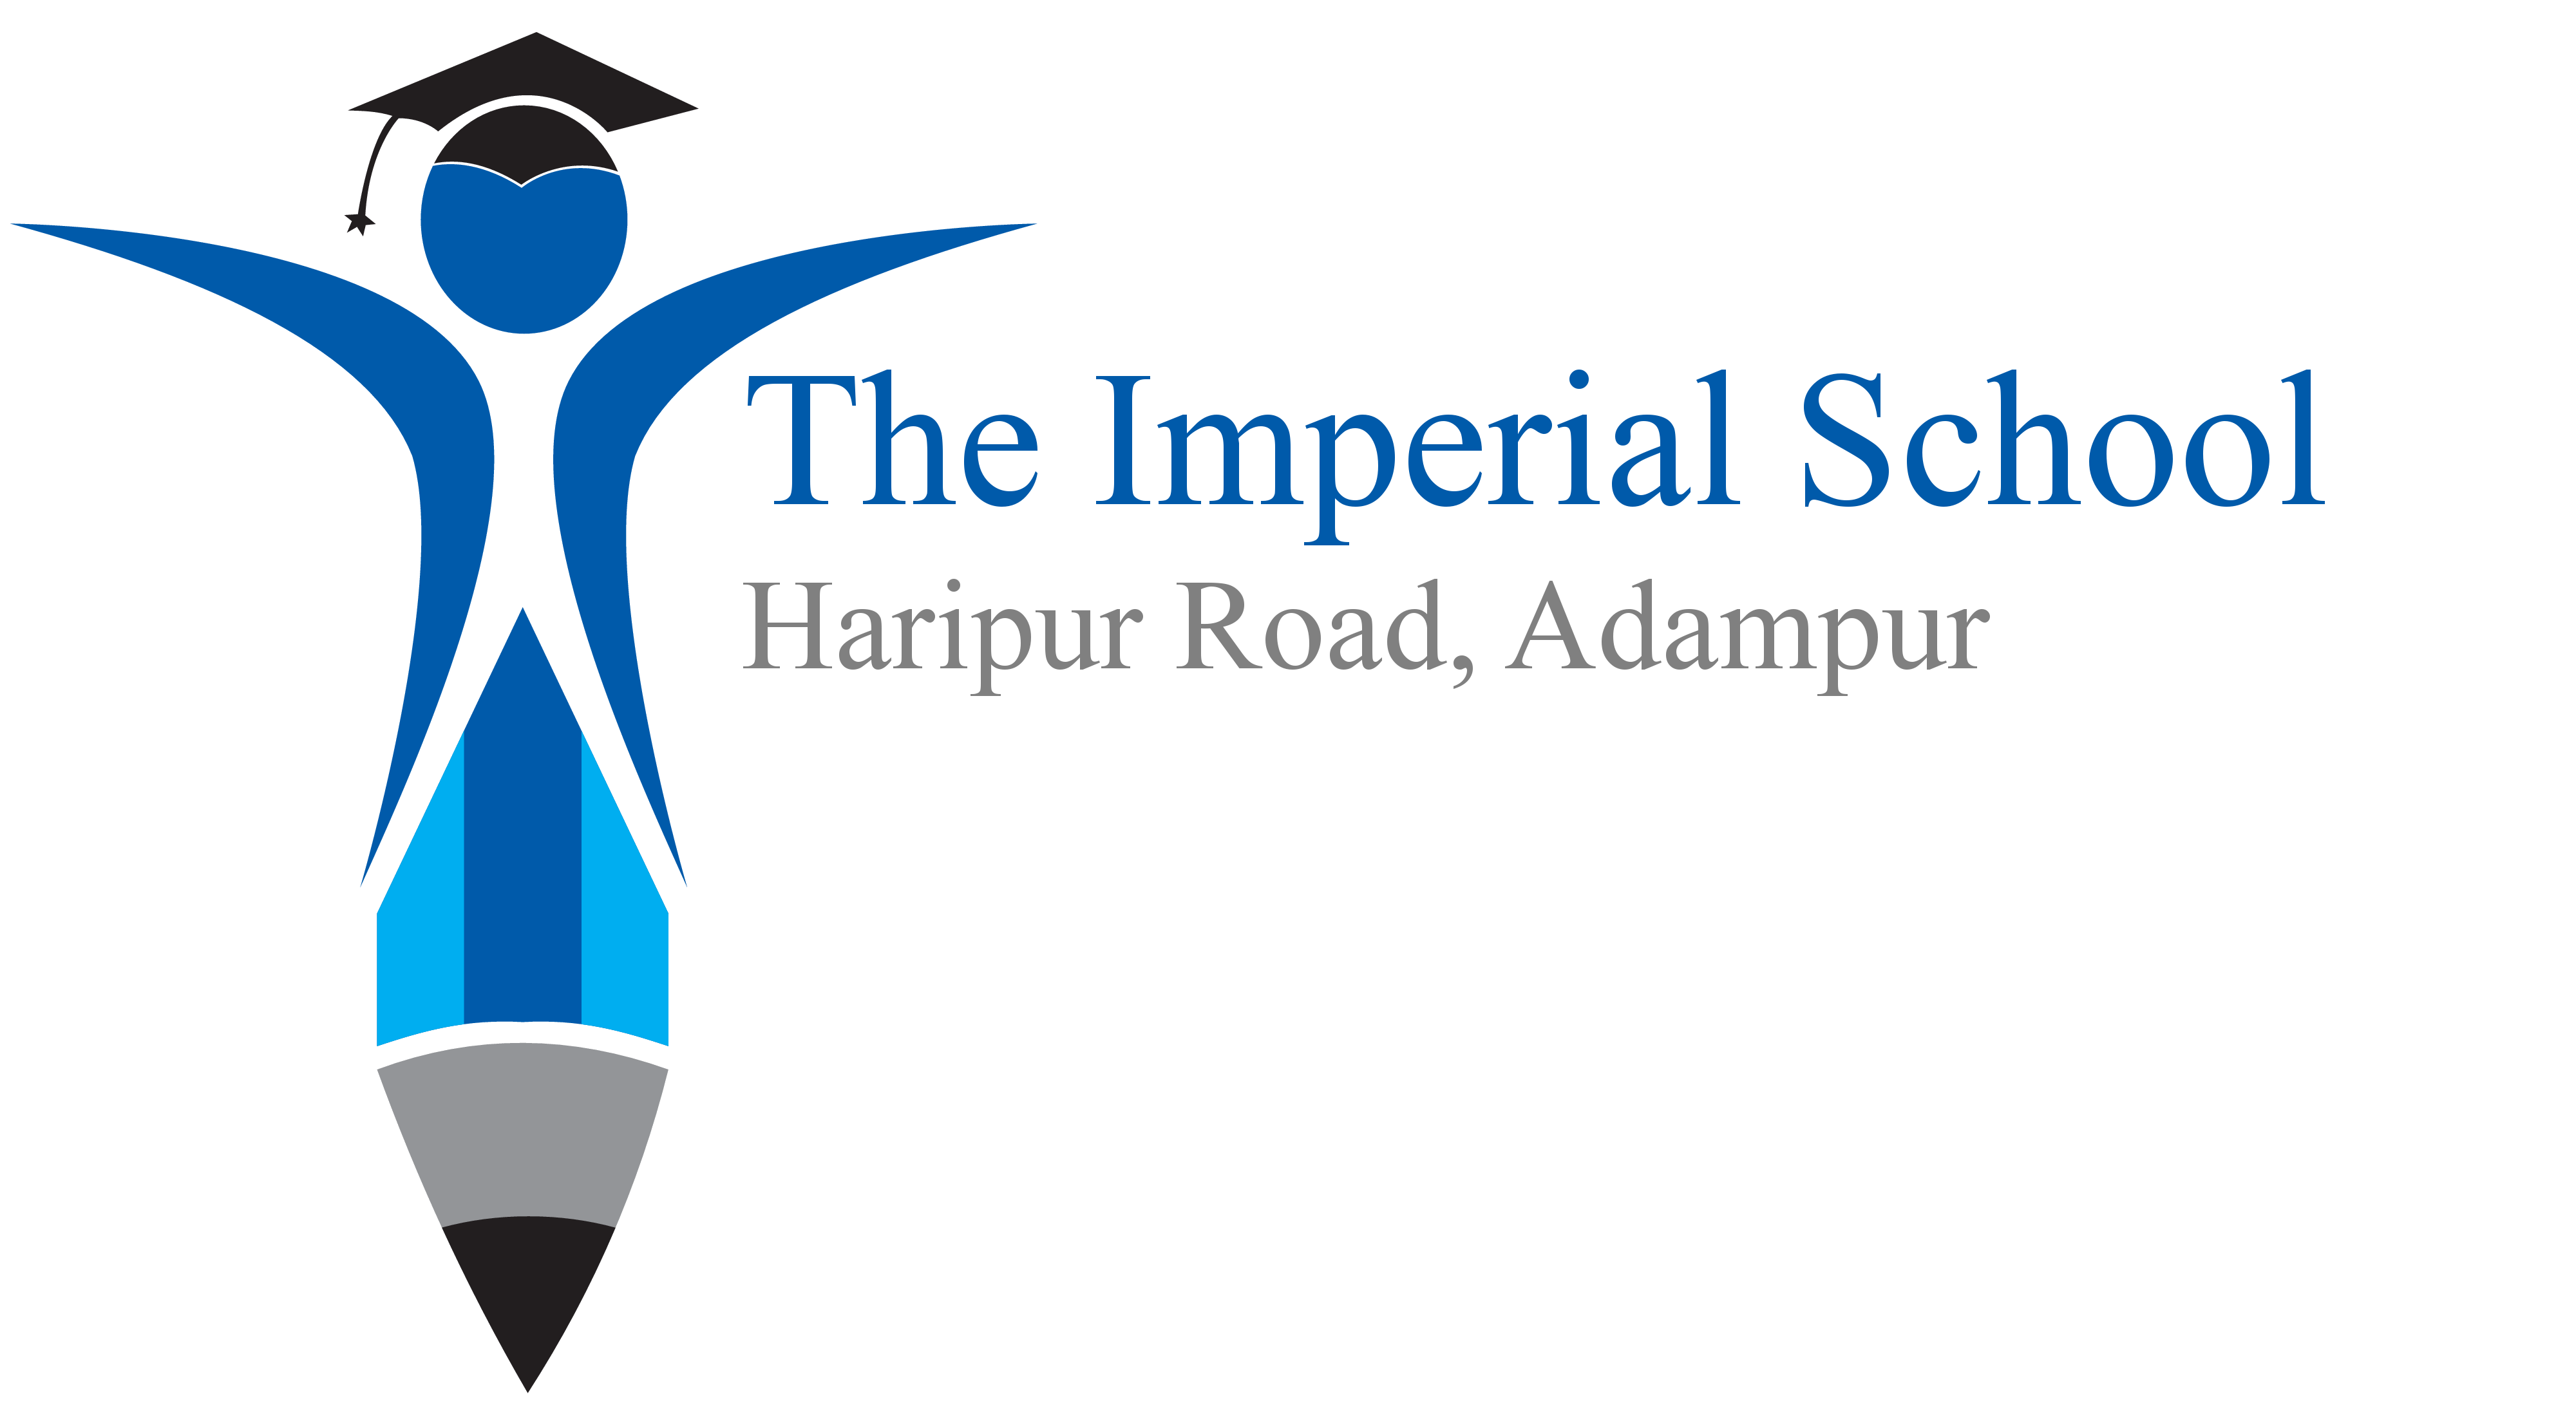 The Imperial School